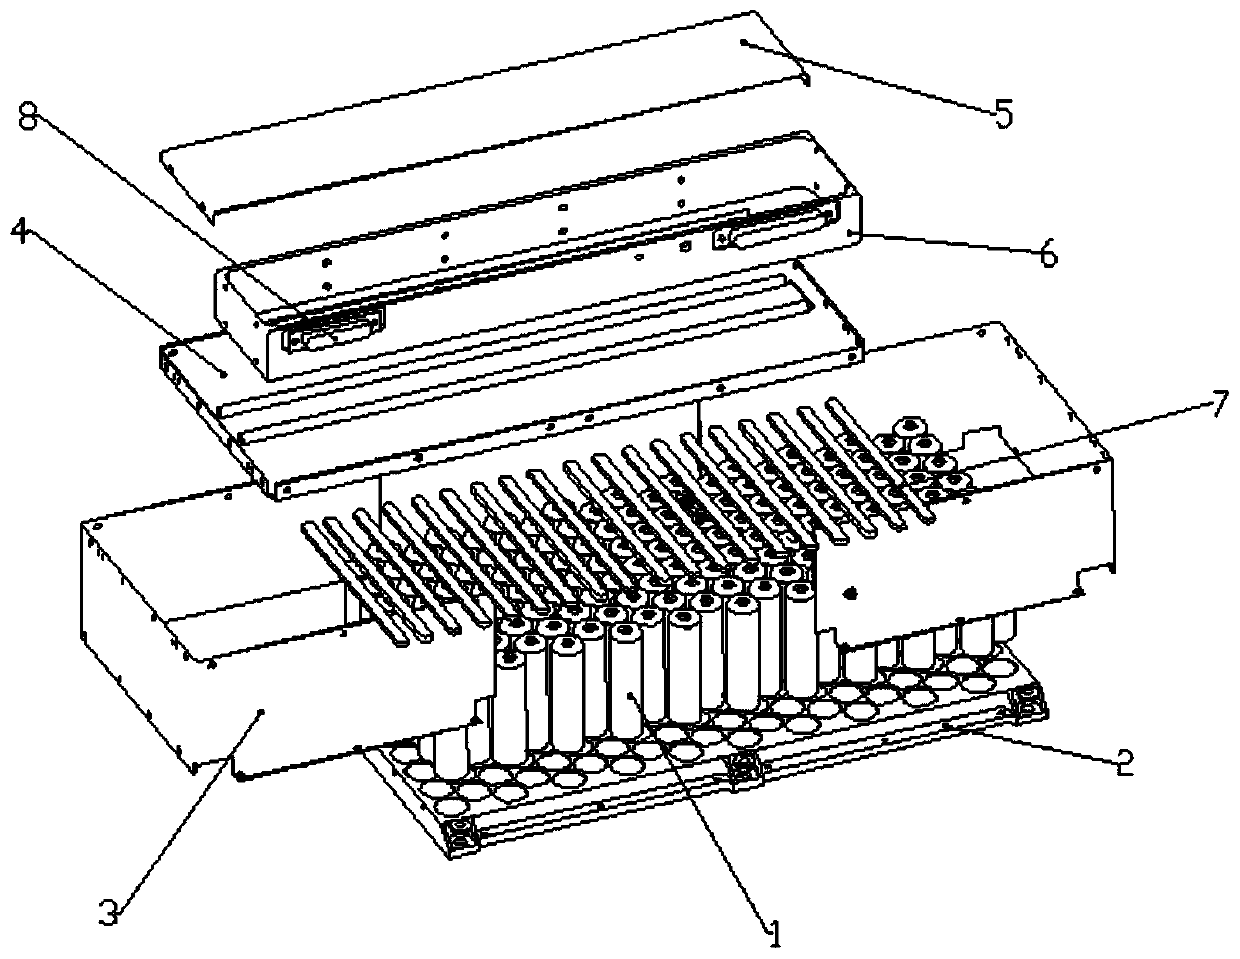 18650 lithium ion battery pack structure